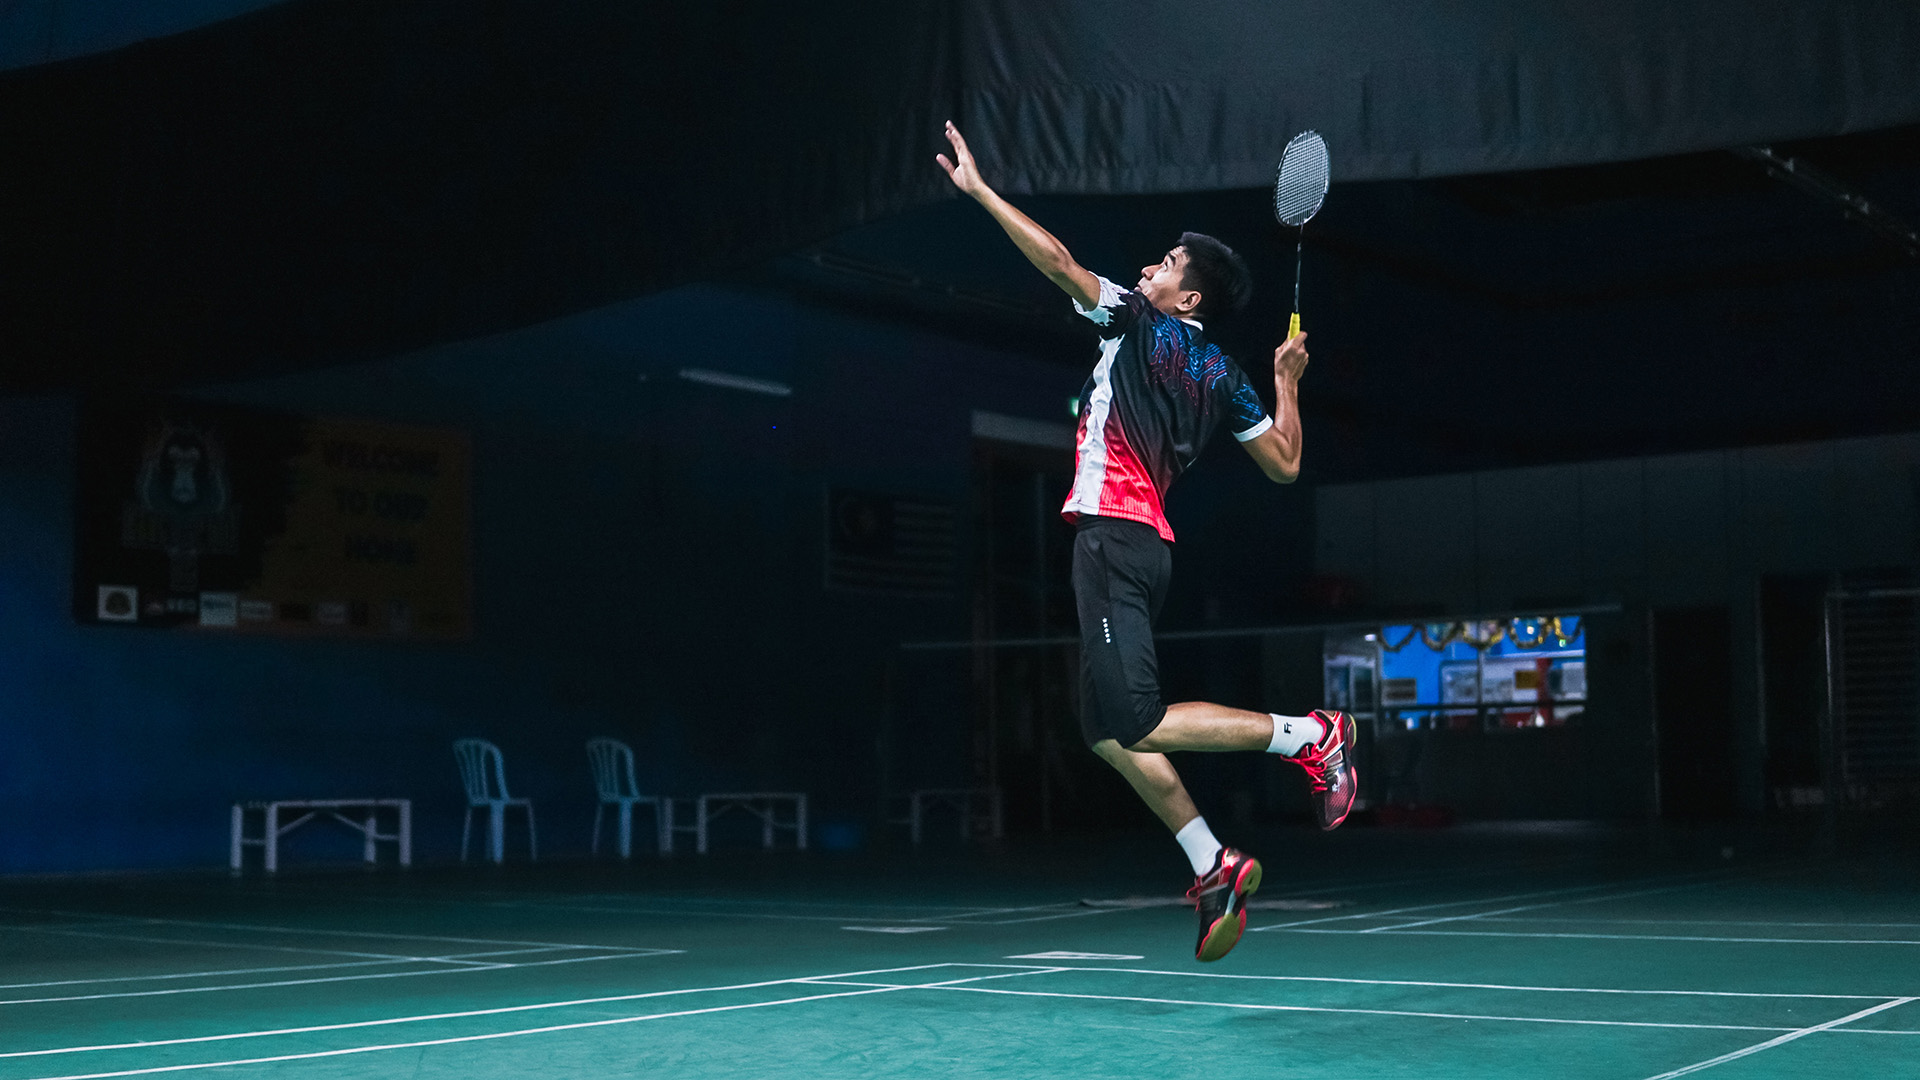 A badminton player jumping for a shot